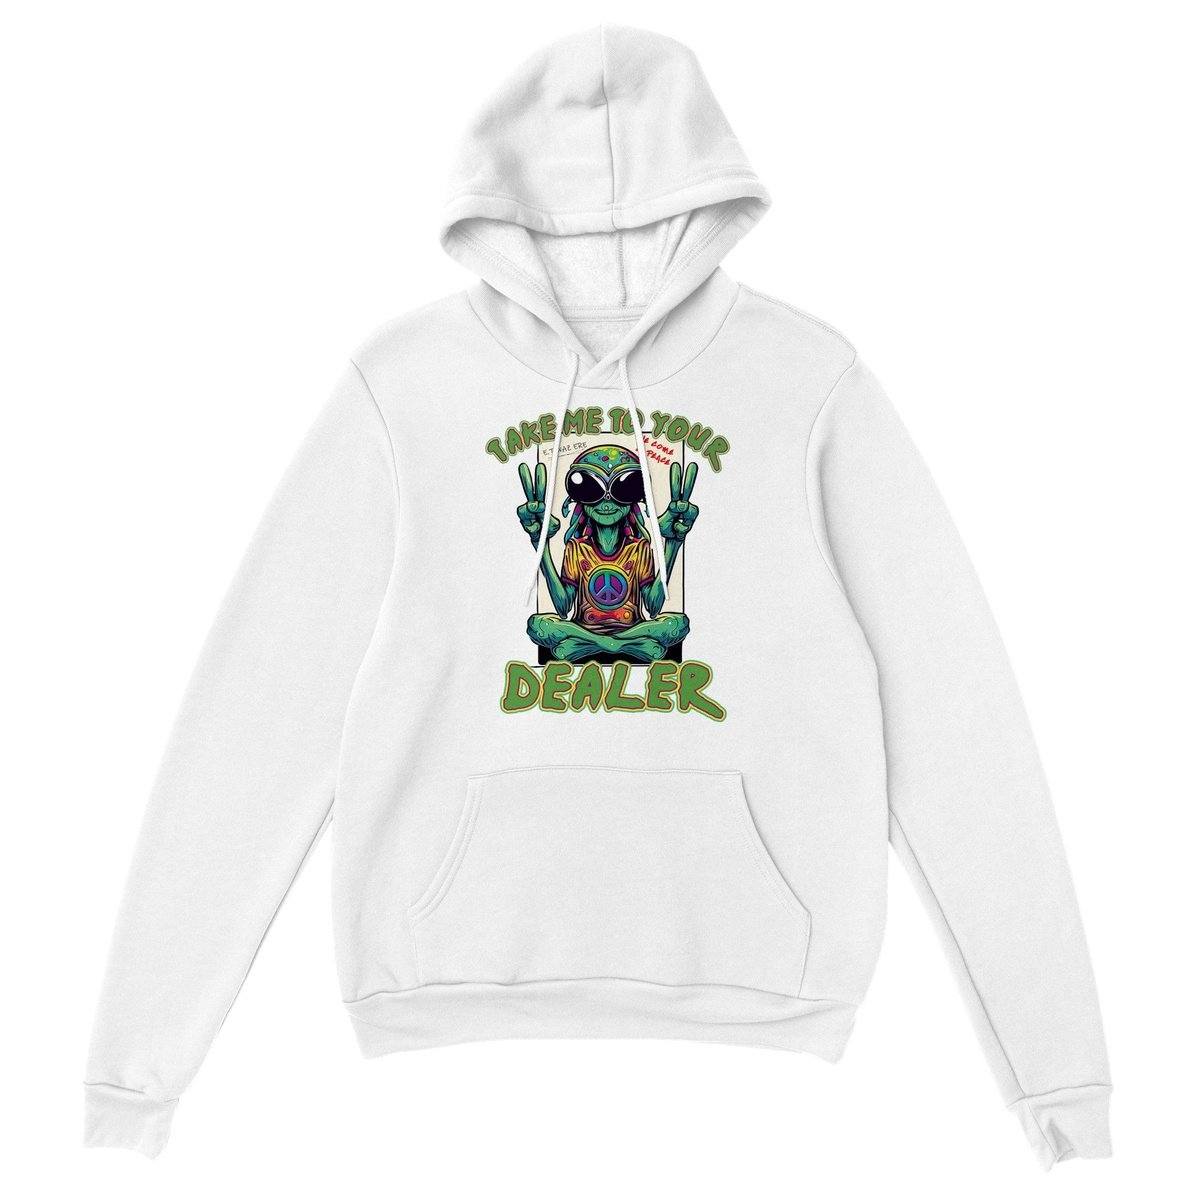 Take Me To Your Dealer Hoodie Australia Online Color White / XS